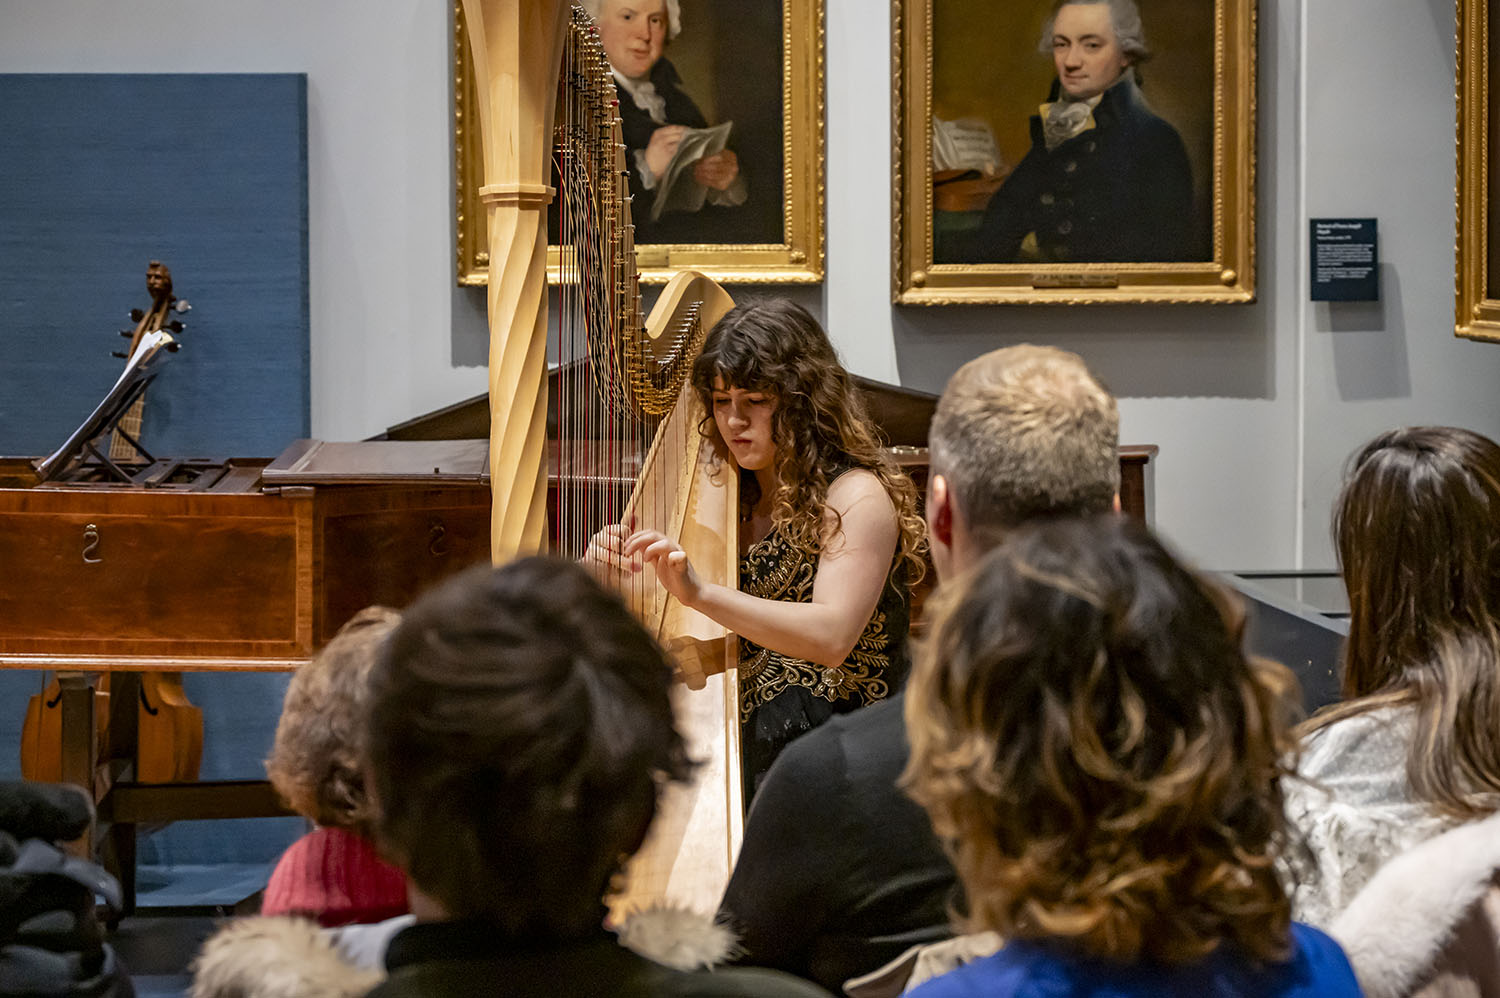 A harpist performing to an audience in the RCM Museum